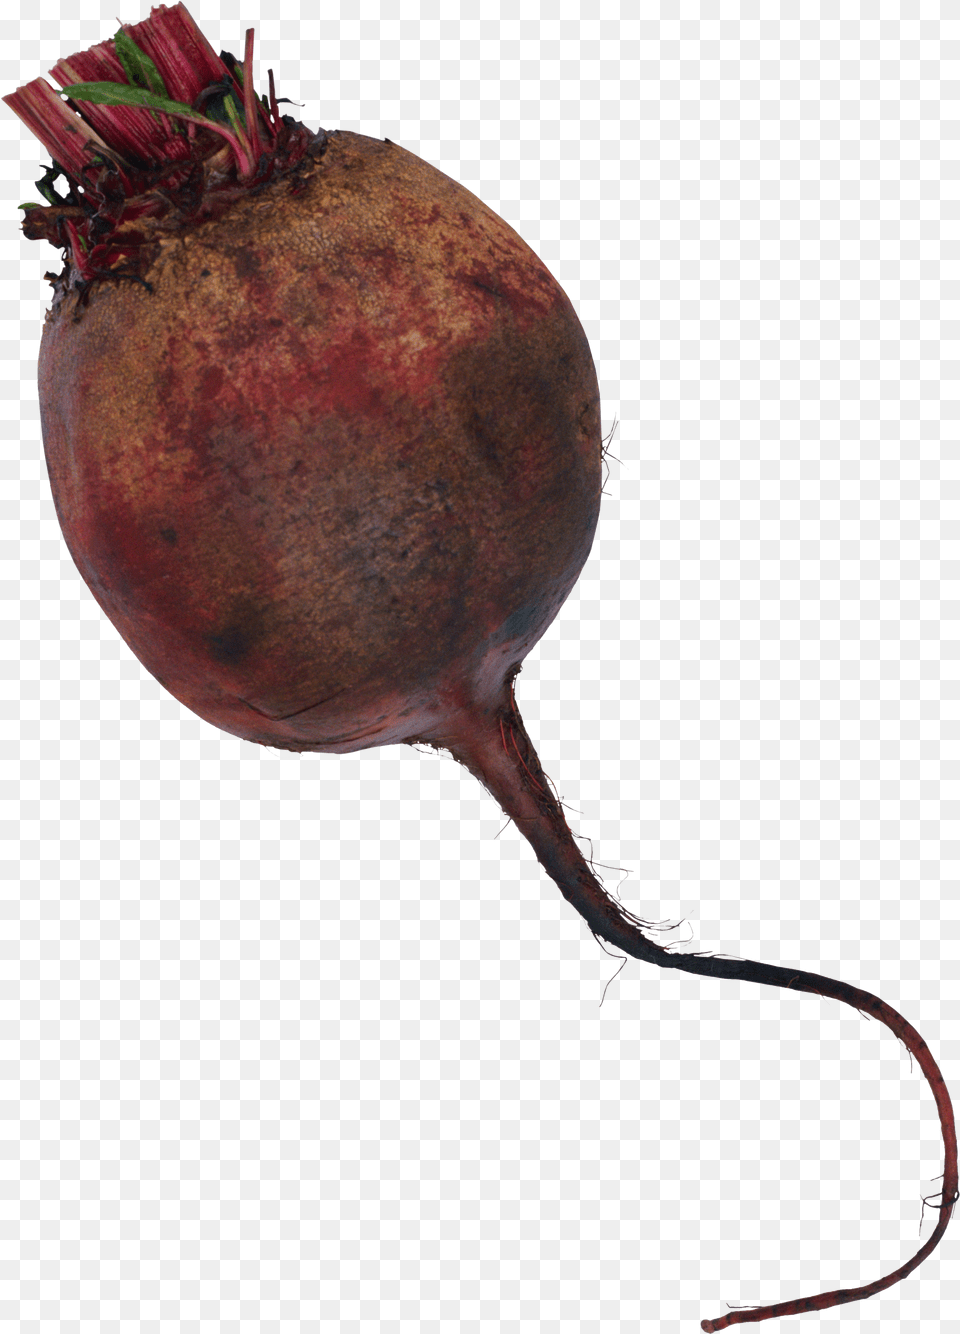 Beet Image For Free Png Download